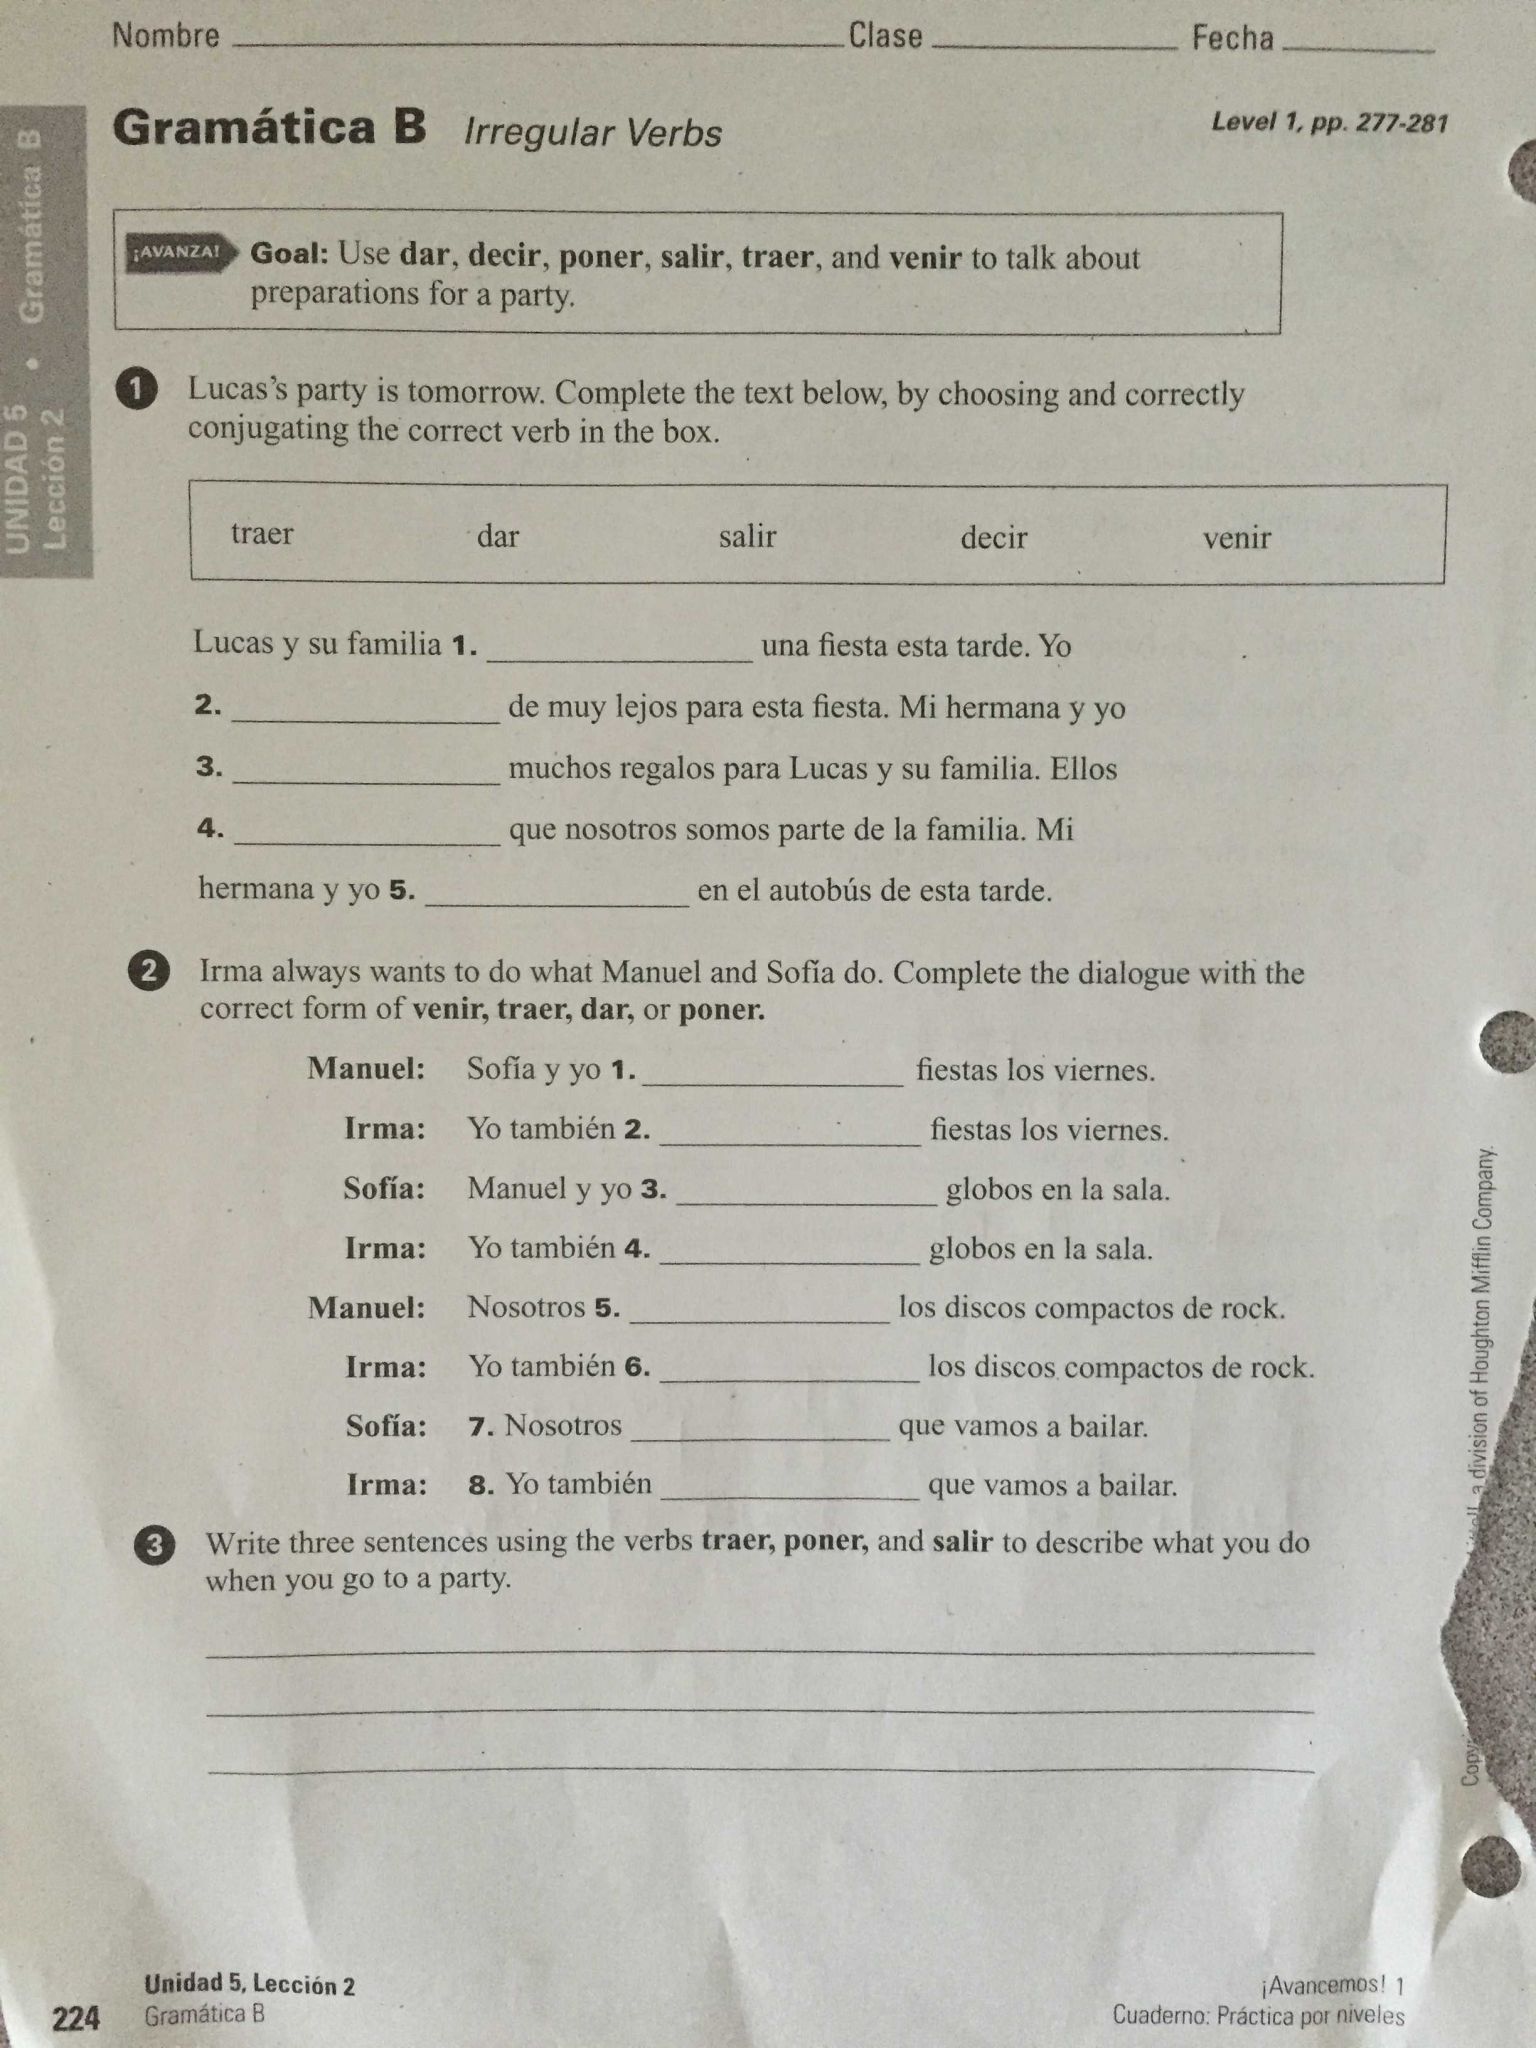 Skills Worksheet Directed Reading A Answer Key Also Thurgood Marshall Middle School